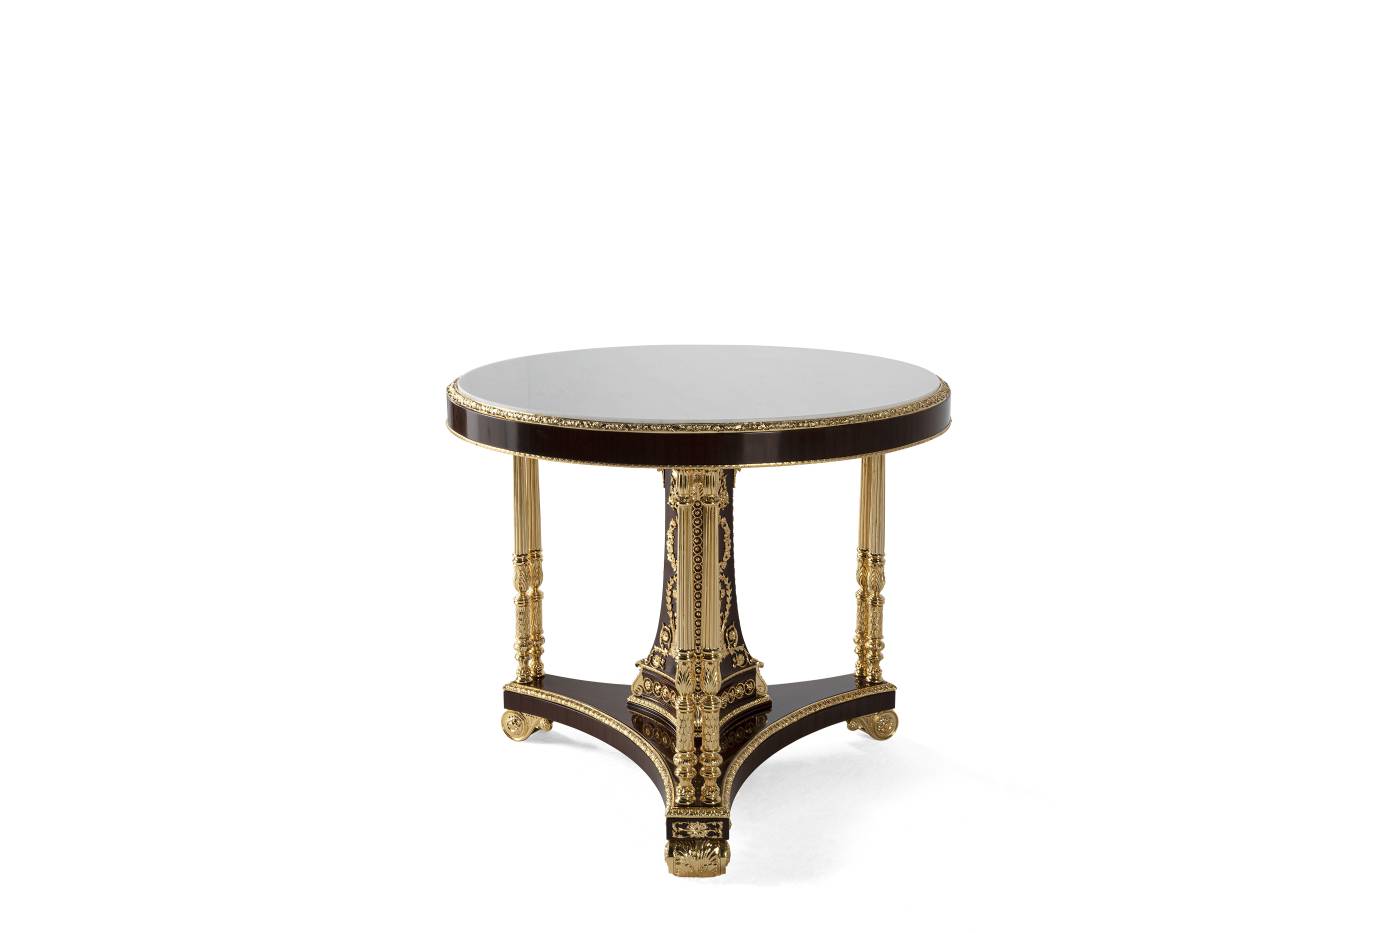 SUPREME entrance table - Discover timeless elegance with Jumbo Collection's Italian luxury entrance tables. 